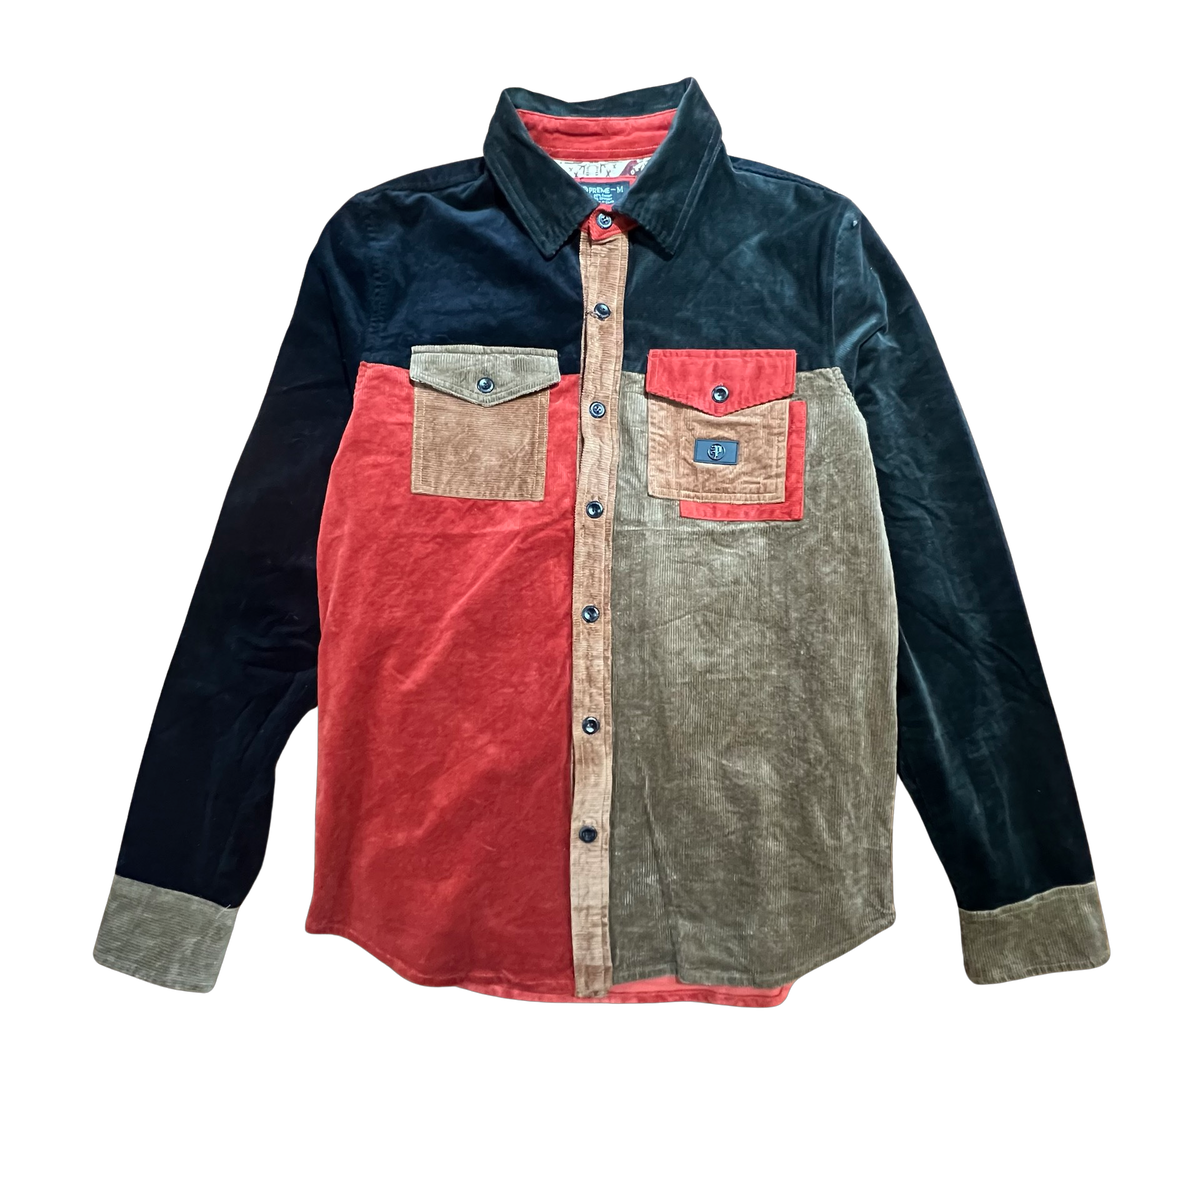 The Latest Levi's Vintage Clothing Trucker is a Mash-Up of Corduroy